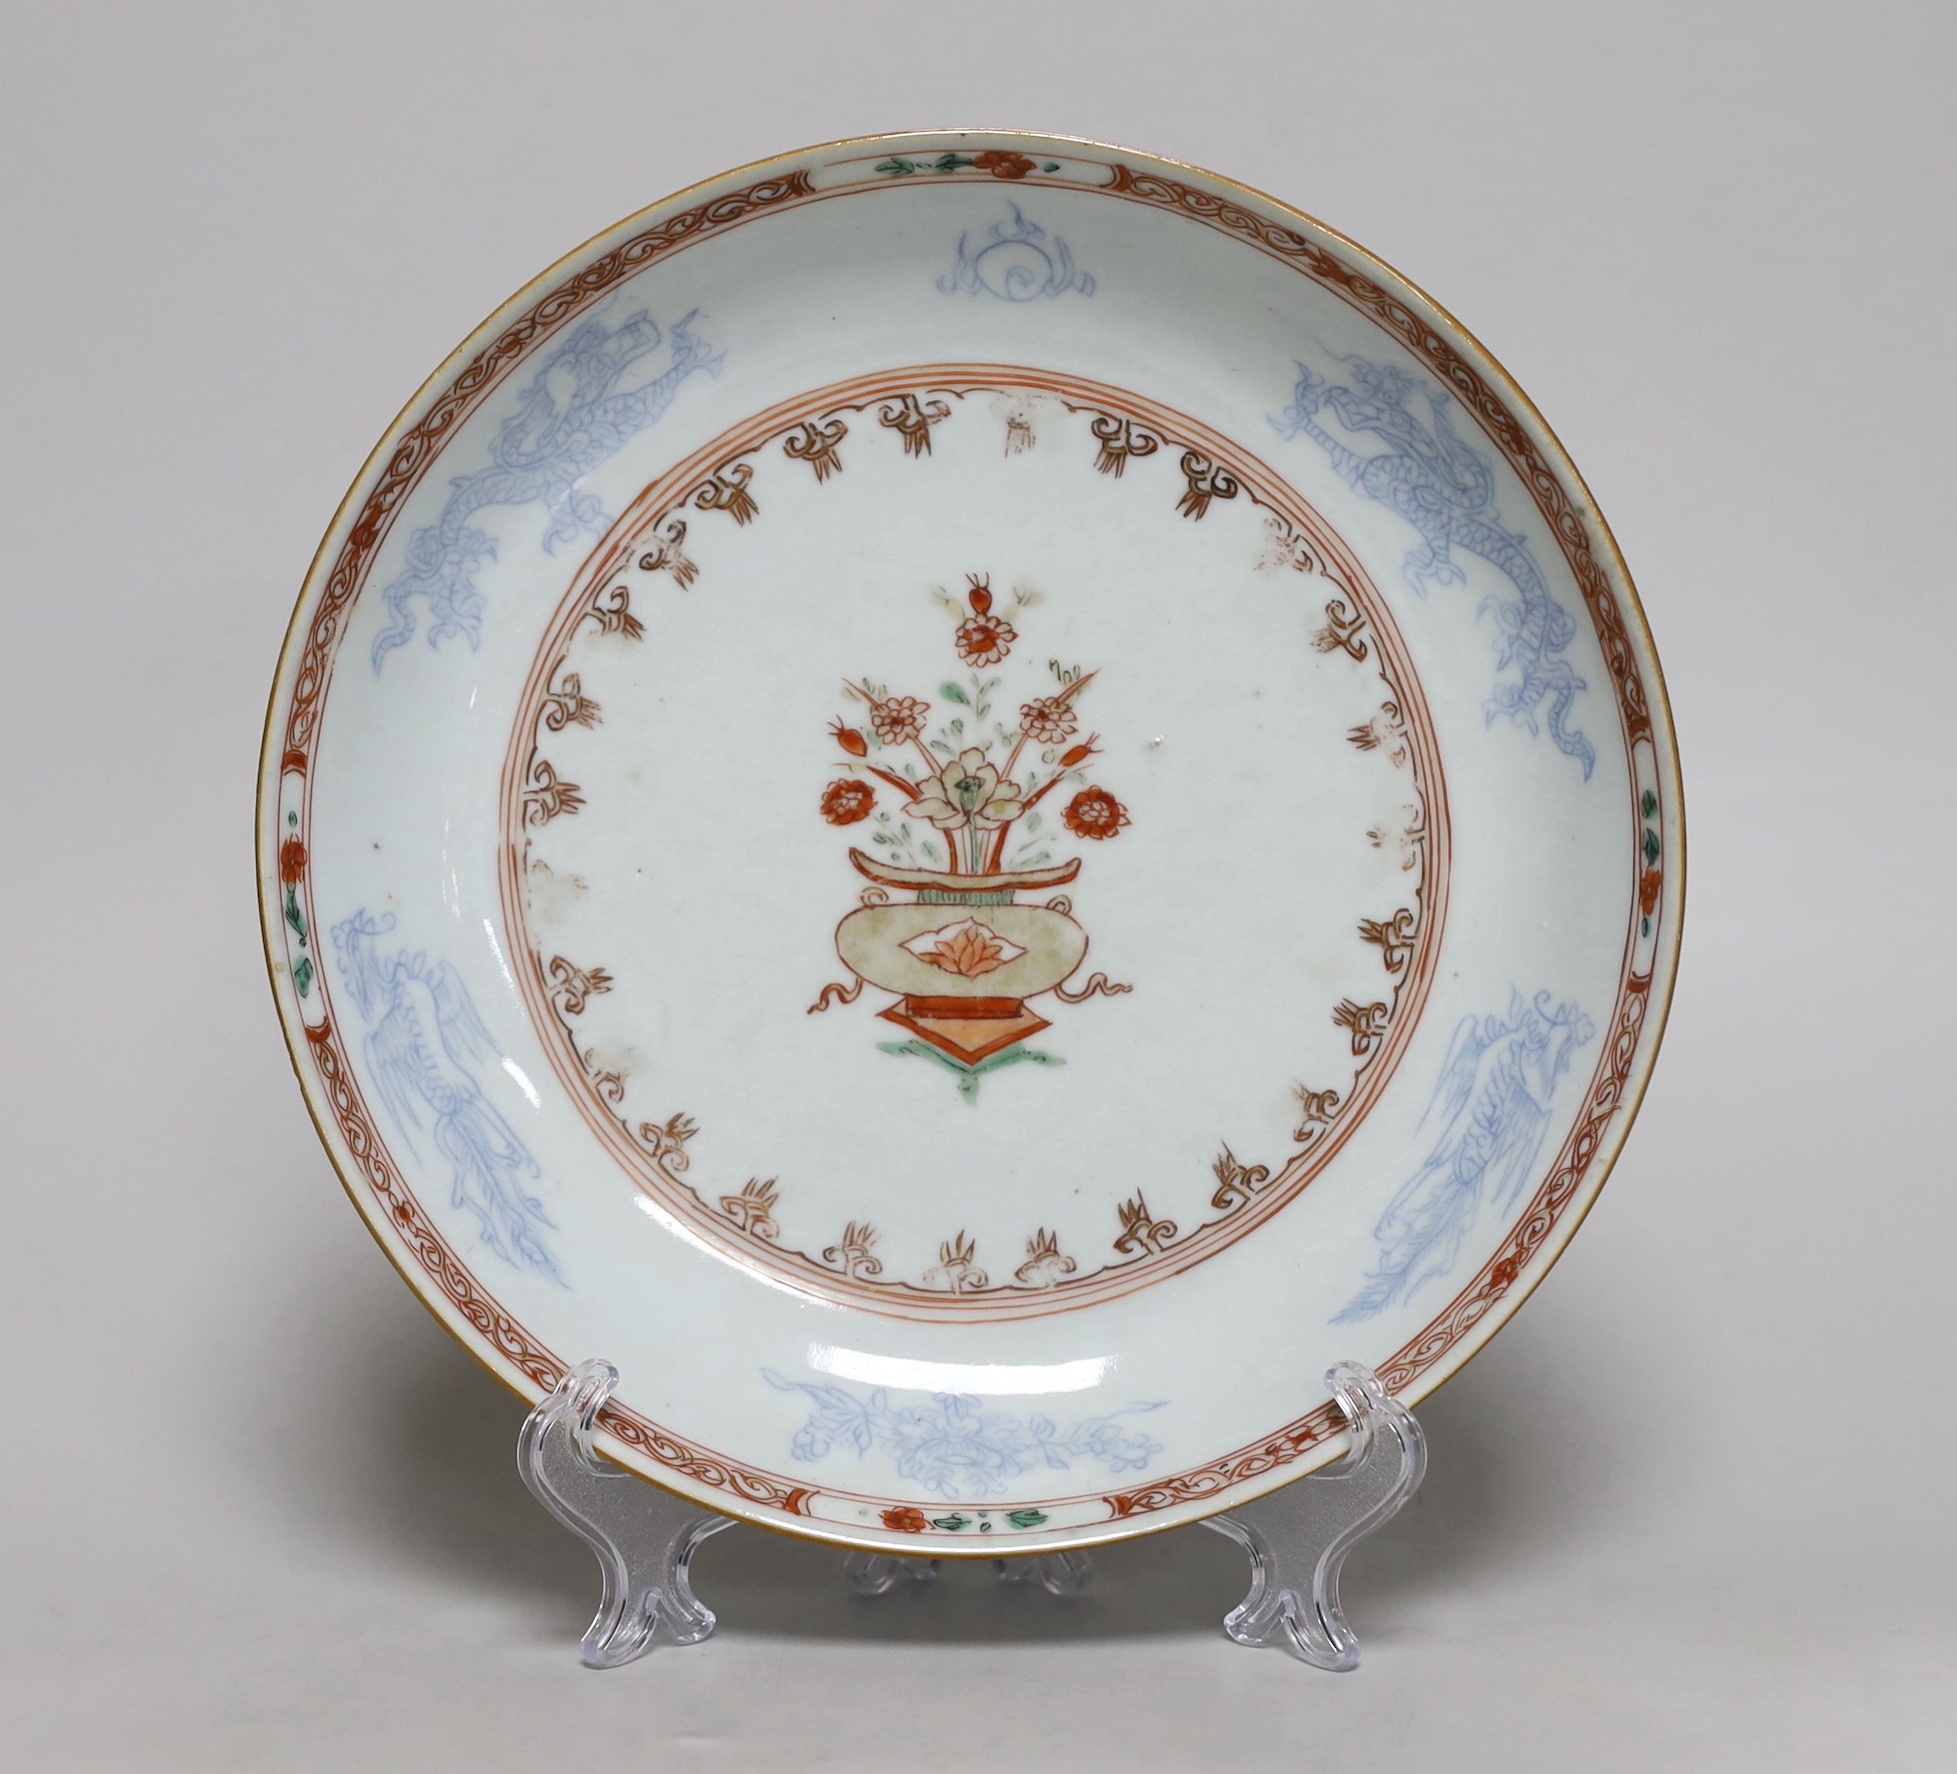 An 18th century Chinese Export plate, 22cm diameter                                                                                                                                                                         